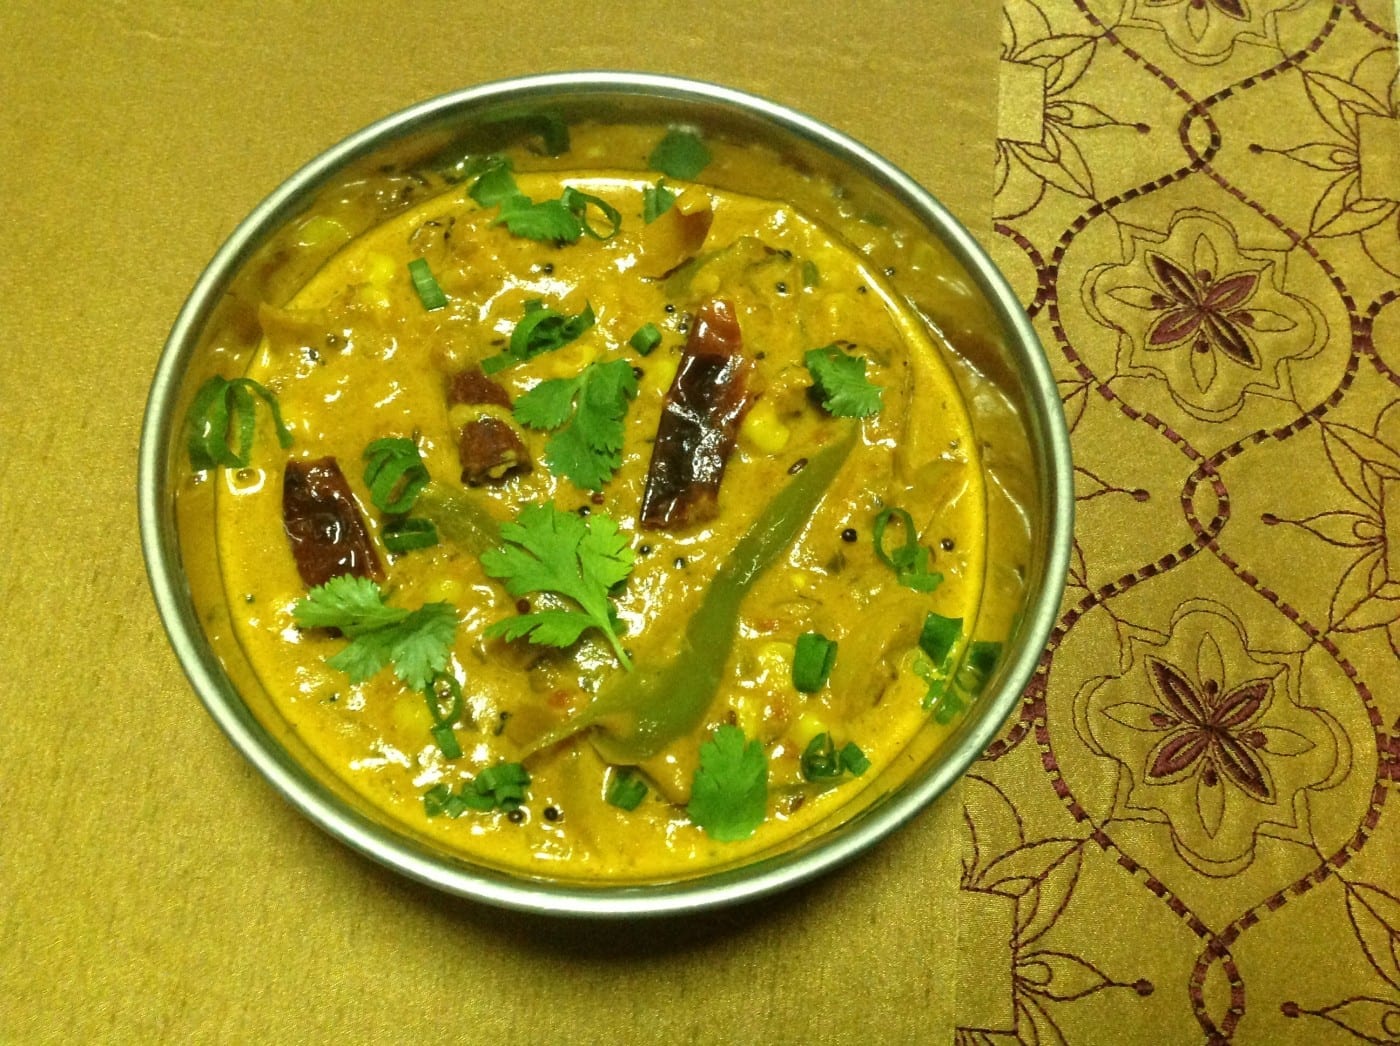 Overhead view of a steel bowl filled with bell pepper makhani on a yellow dinner mat